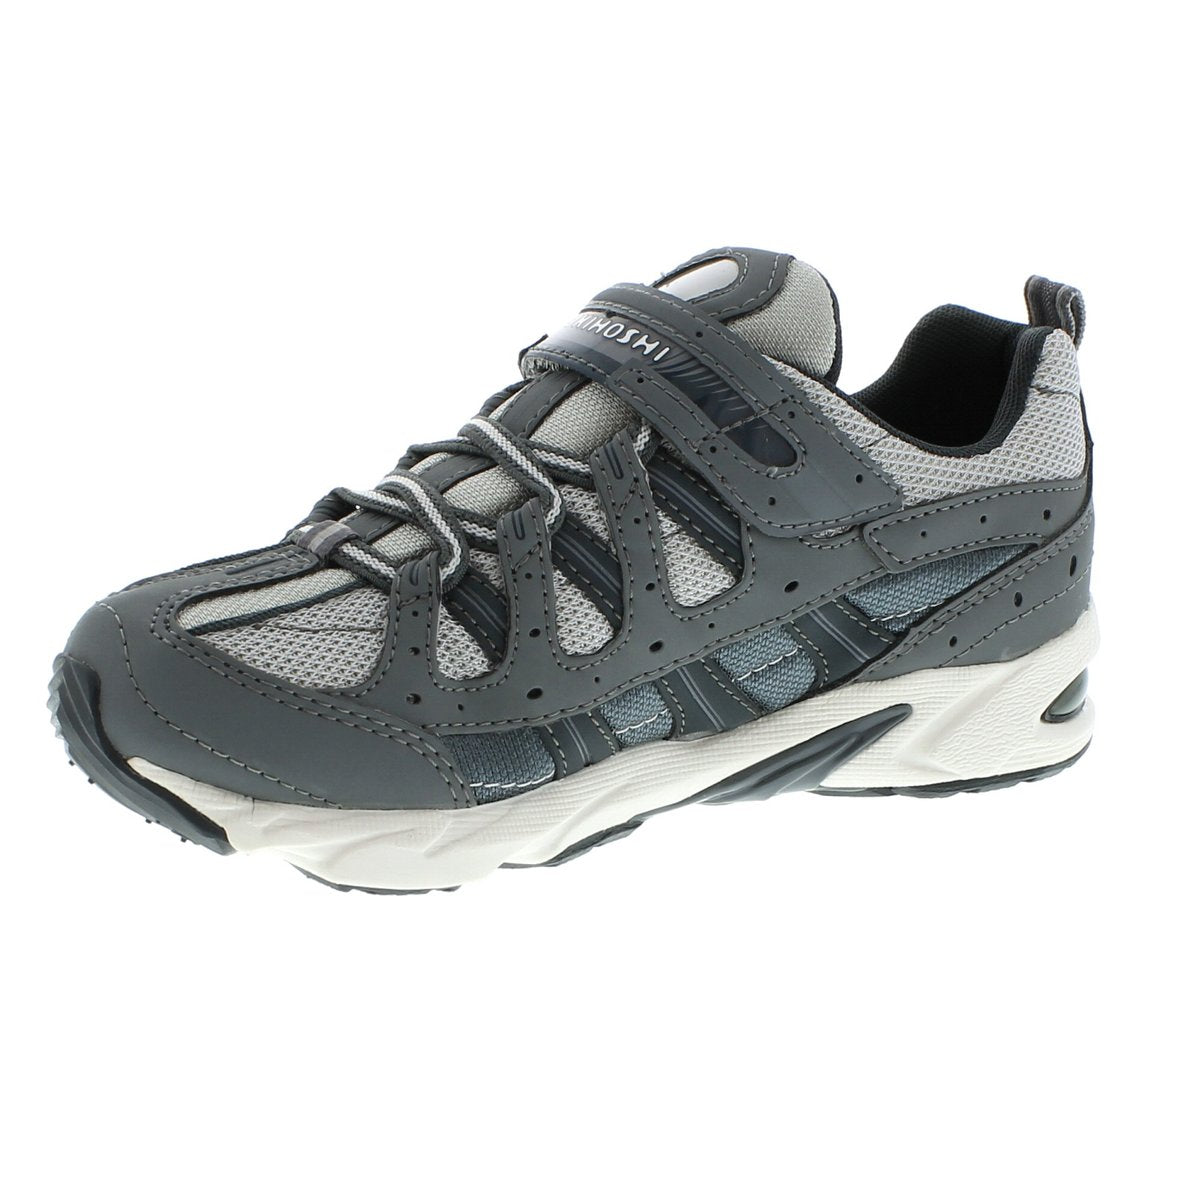 Youth Tsukihoshi Speed Sneaker in Gray/Gray from the front view